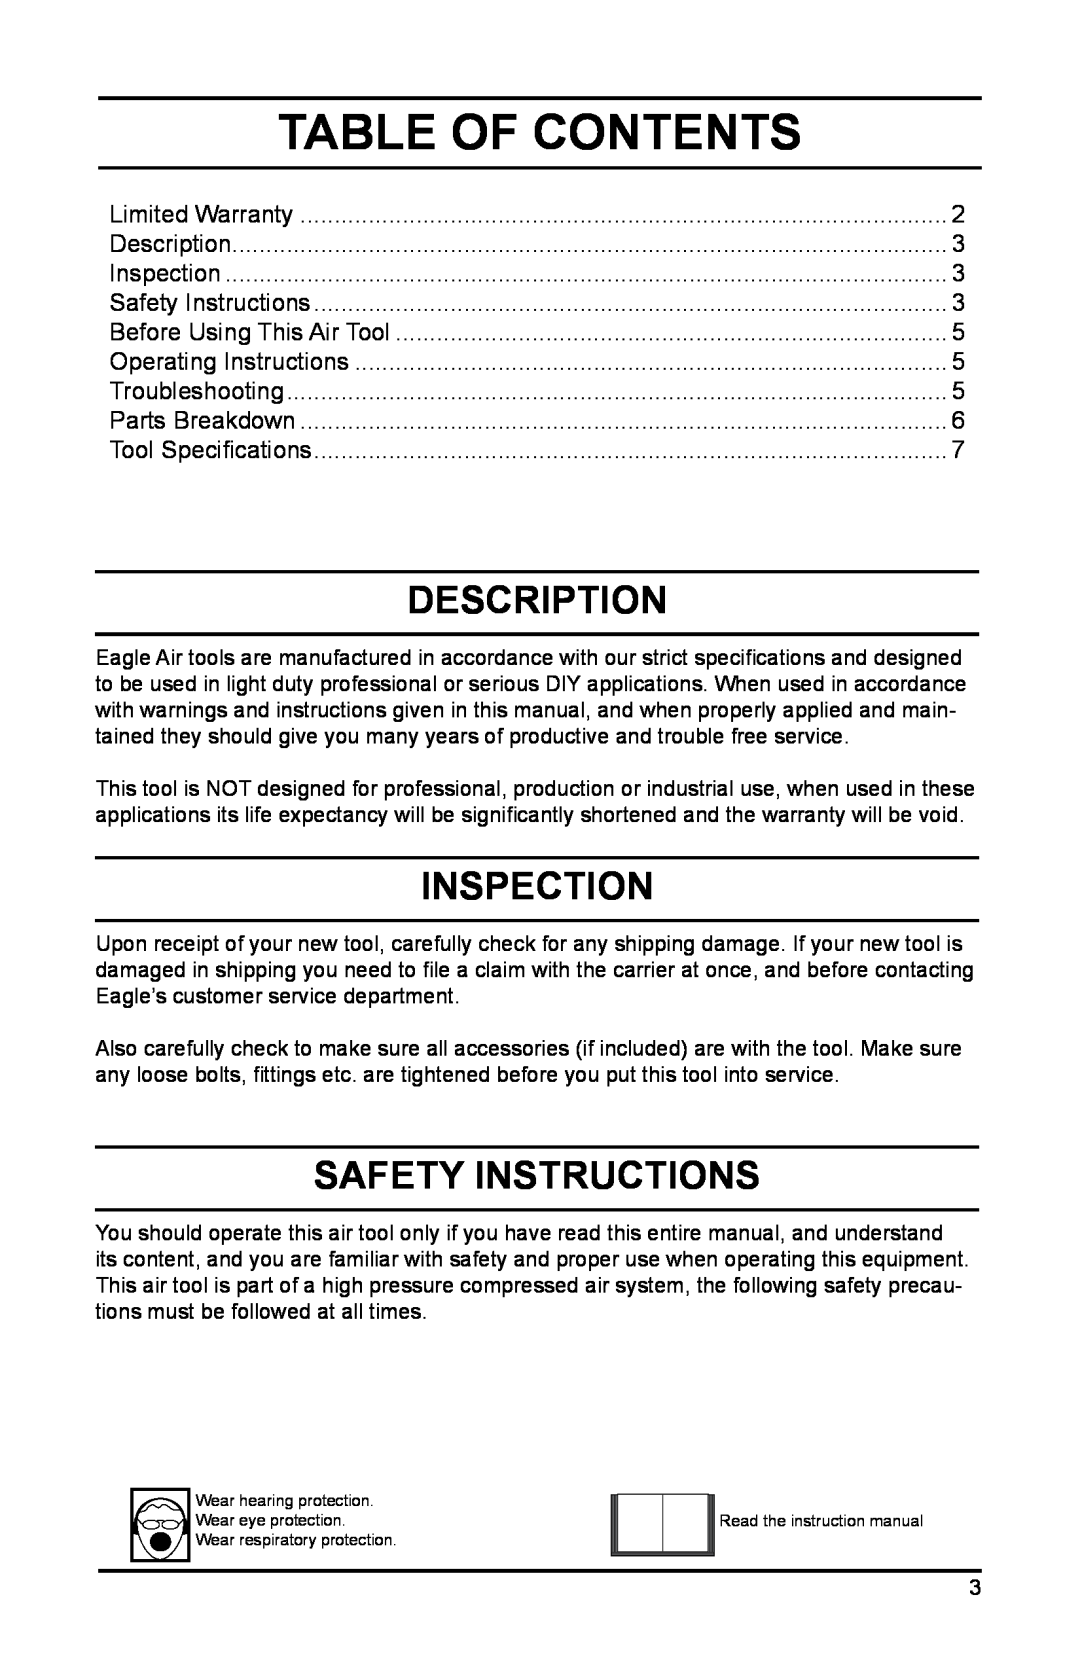 Eagle Electronics EGA530 owner manual Table Of Contents, Description, Inspection, Safety Instructions, Limited Warranty 